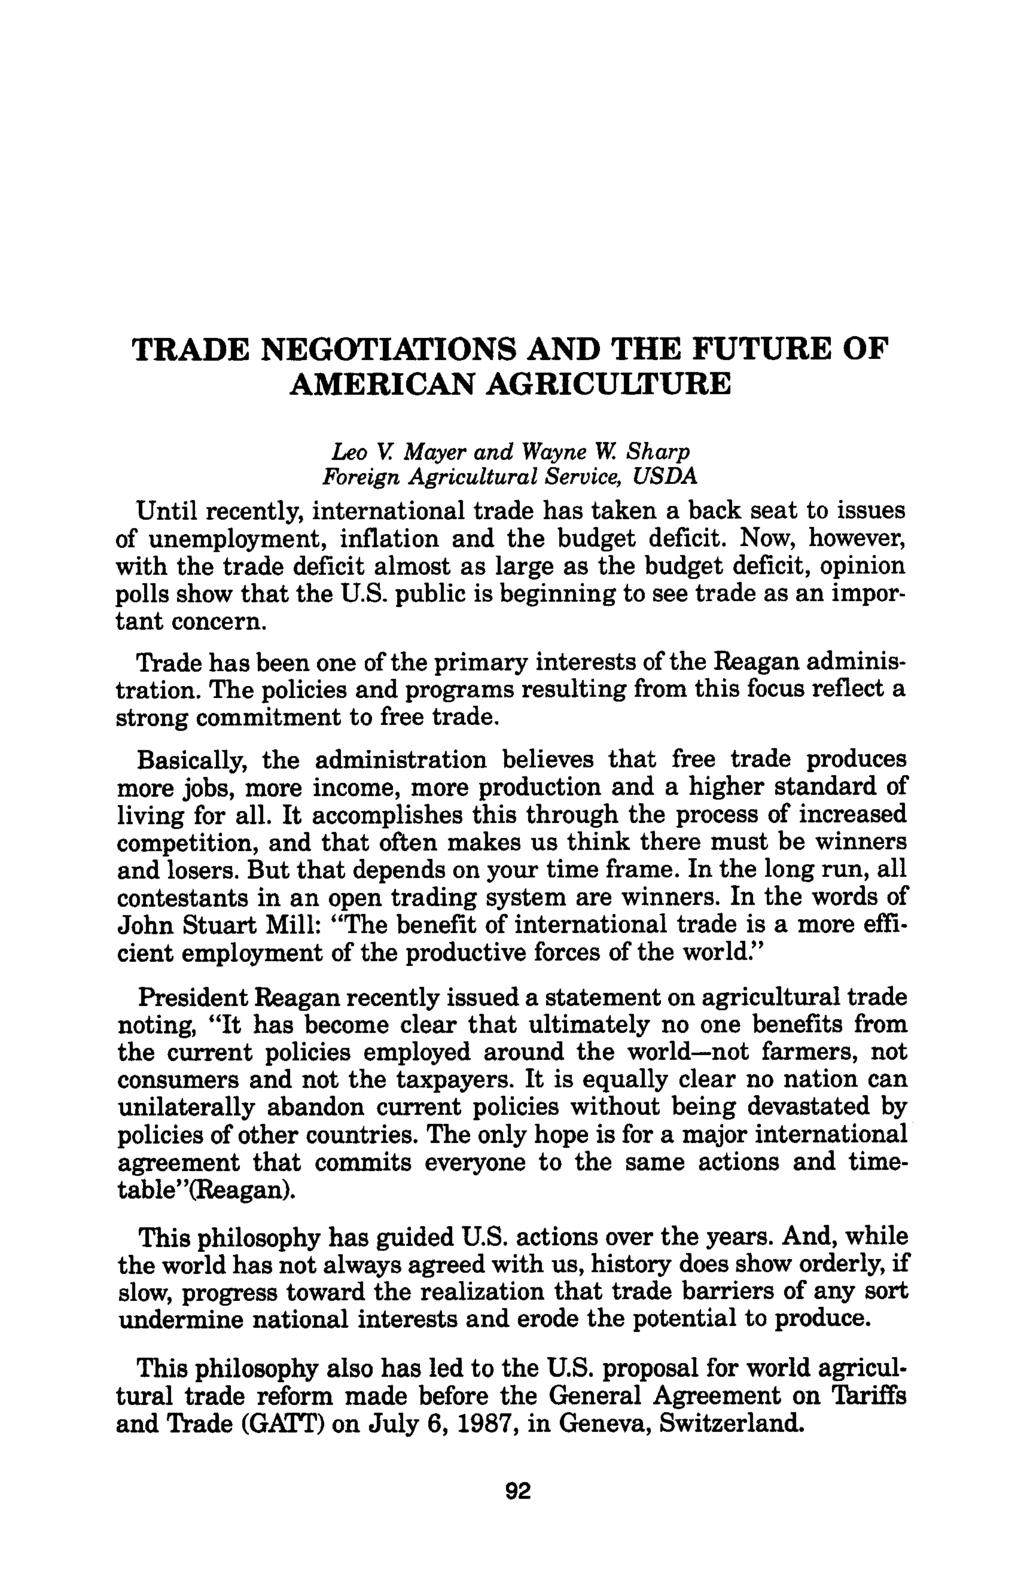 TRADE NEGOTIATIONS AND THE FUTURE OF AMERICAN AGRICULTURE Leo V Mayer and Wayne W Sharp Foreign Agricultural Service, USDA Until recently, international trade has taken a back seat to issues of